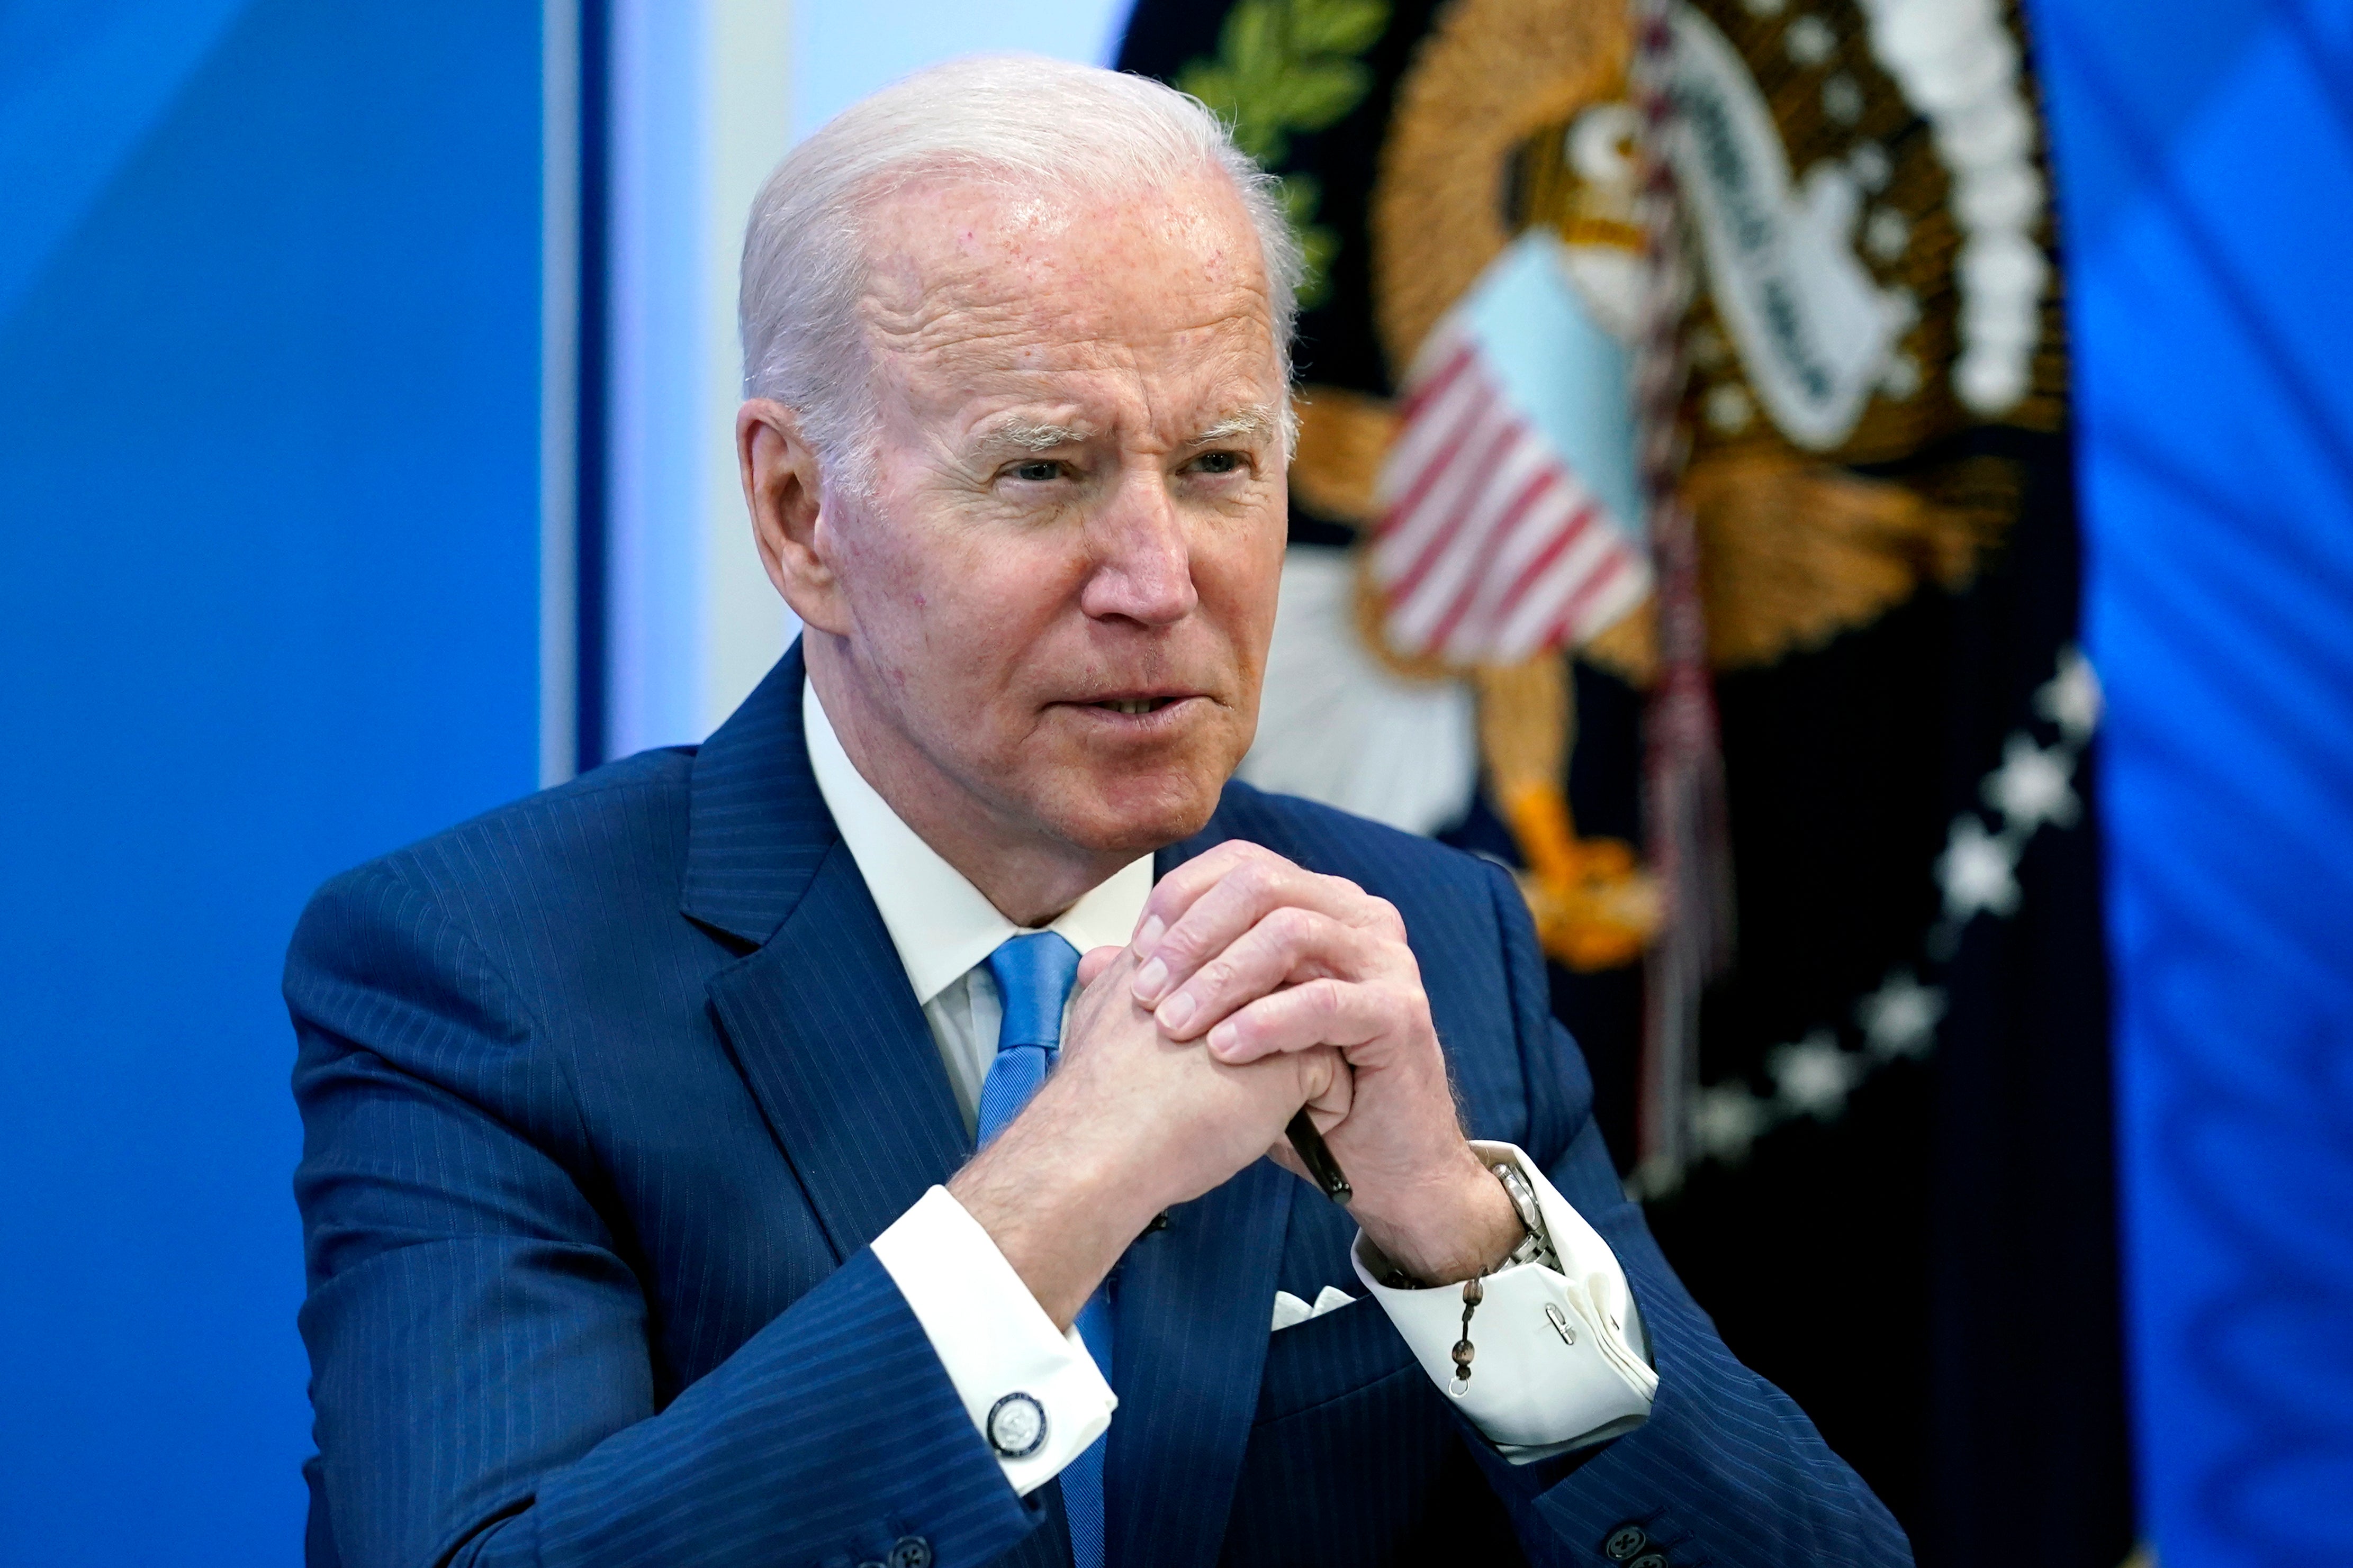 President Joe Biden speaks in the South Court Auditorium on the White House complex in Washington, April 28, 2022. Biden has repeatedly said directly military action is off the table, citing a possible “World War III” as a chief concern.